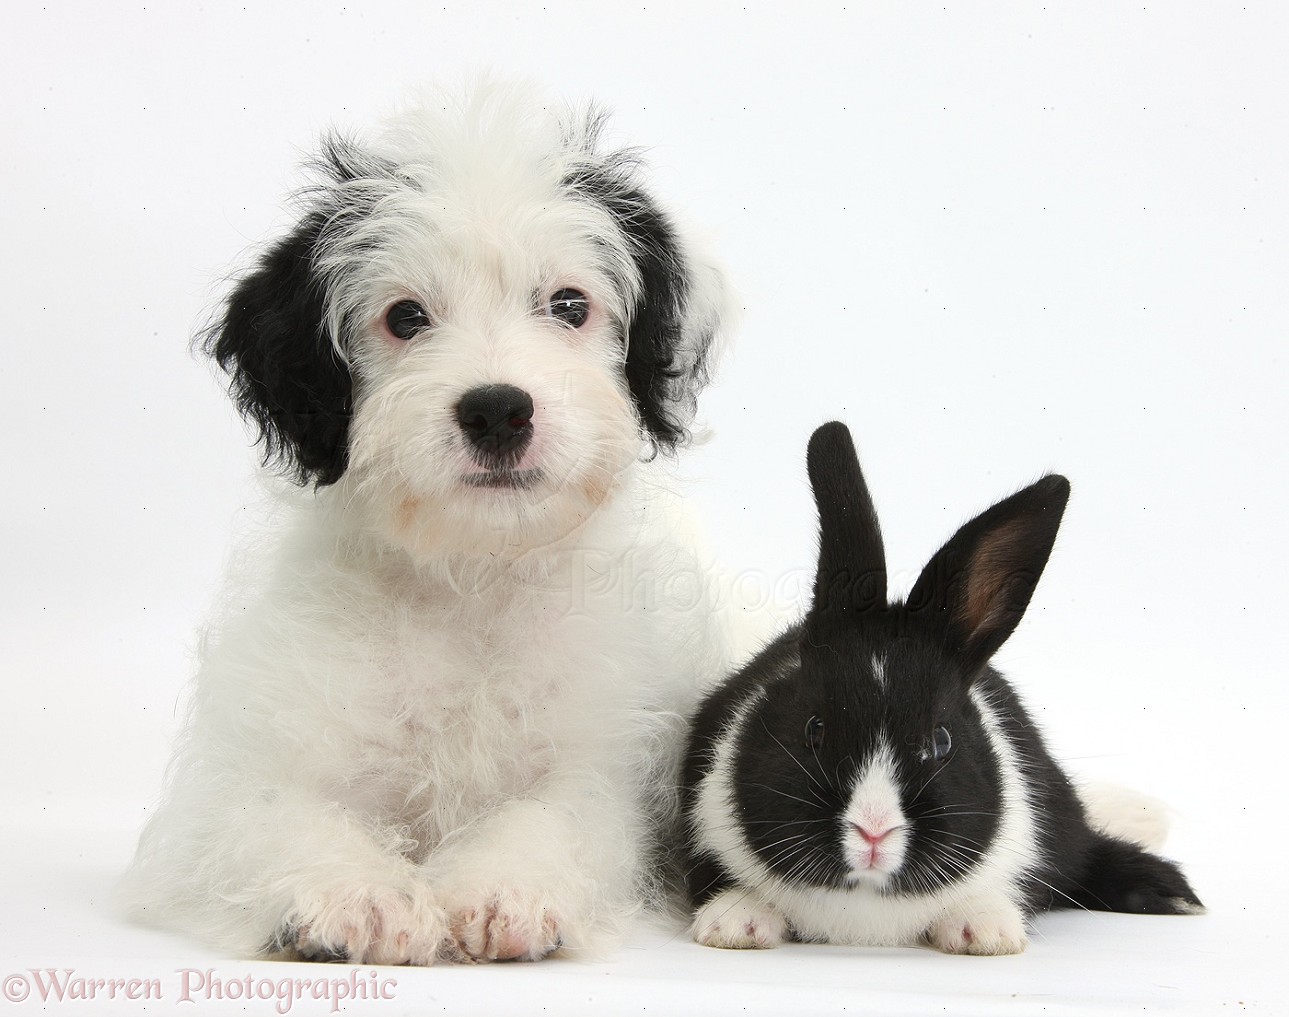 WP36018 Jack-a-poo (Poodle x Jack Russell Terrier) bitch pup, Pukka, 10 weeks old, with black-and-white baby rabbit. - 36018-Jack-a-poo-pup-with-black-and-white-baby-bunny-white-background